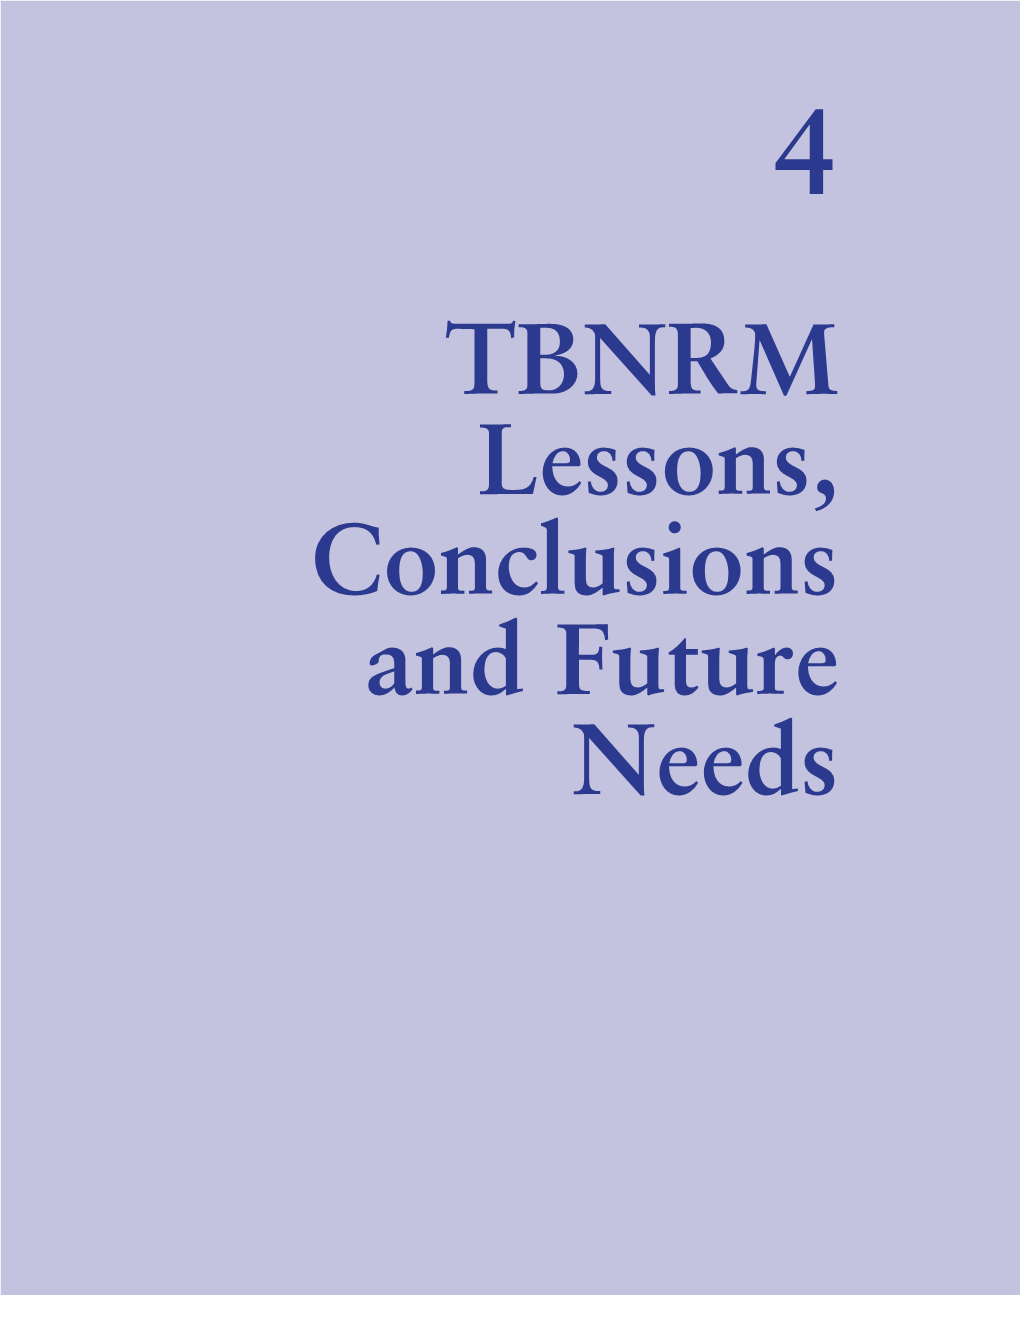 TBNRM Lessons, Conclusions and Future Needs TBNRM Lessons, Conclusions and Future Needs